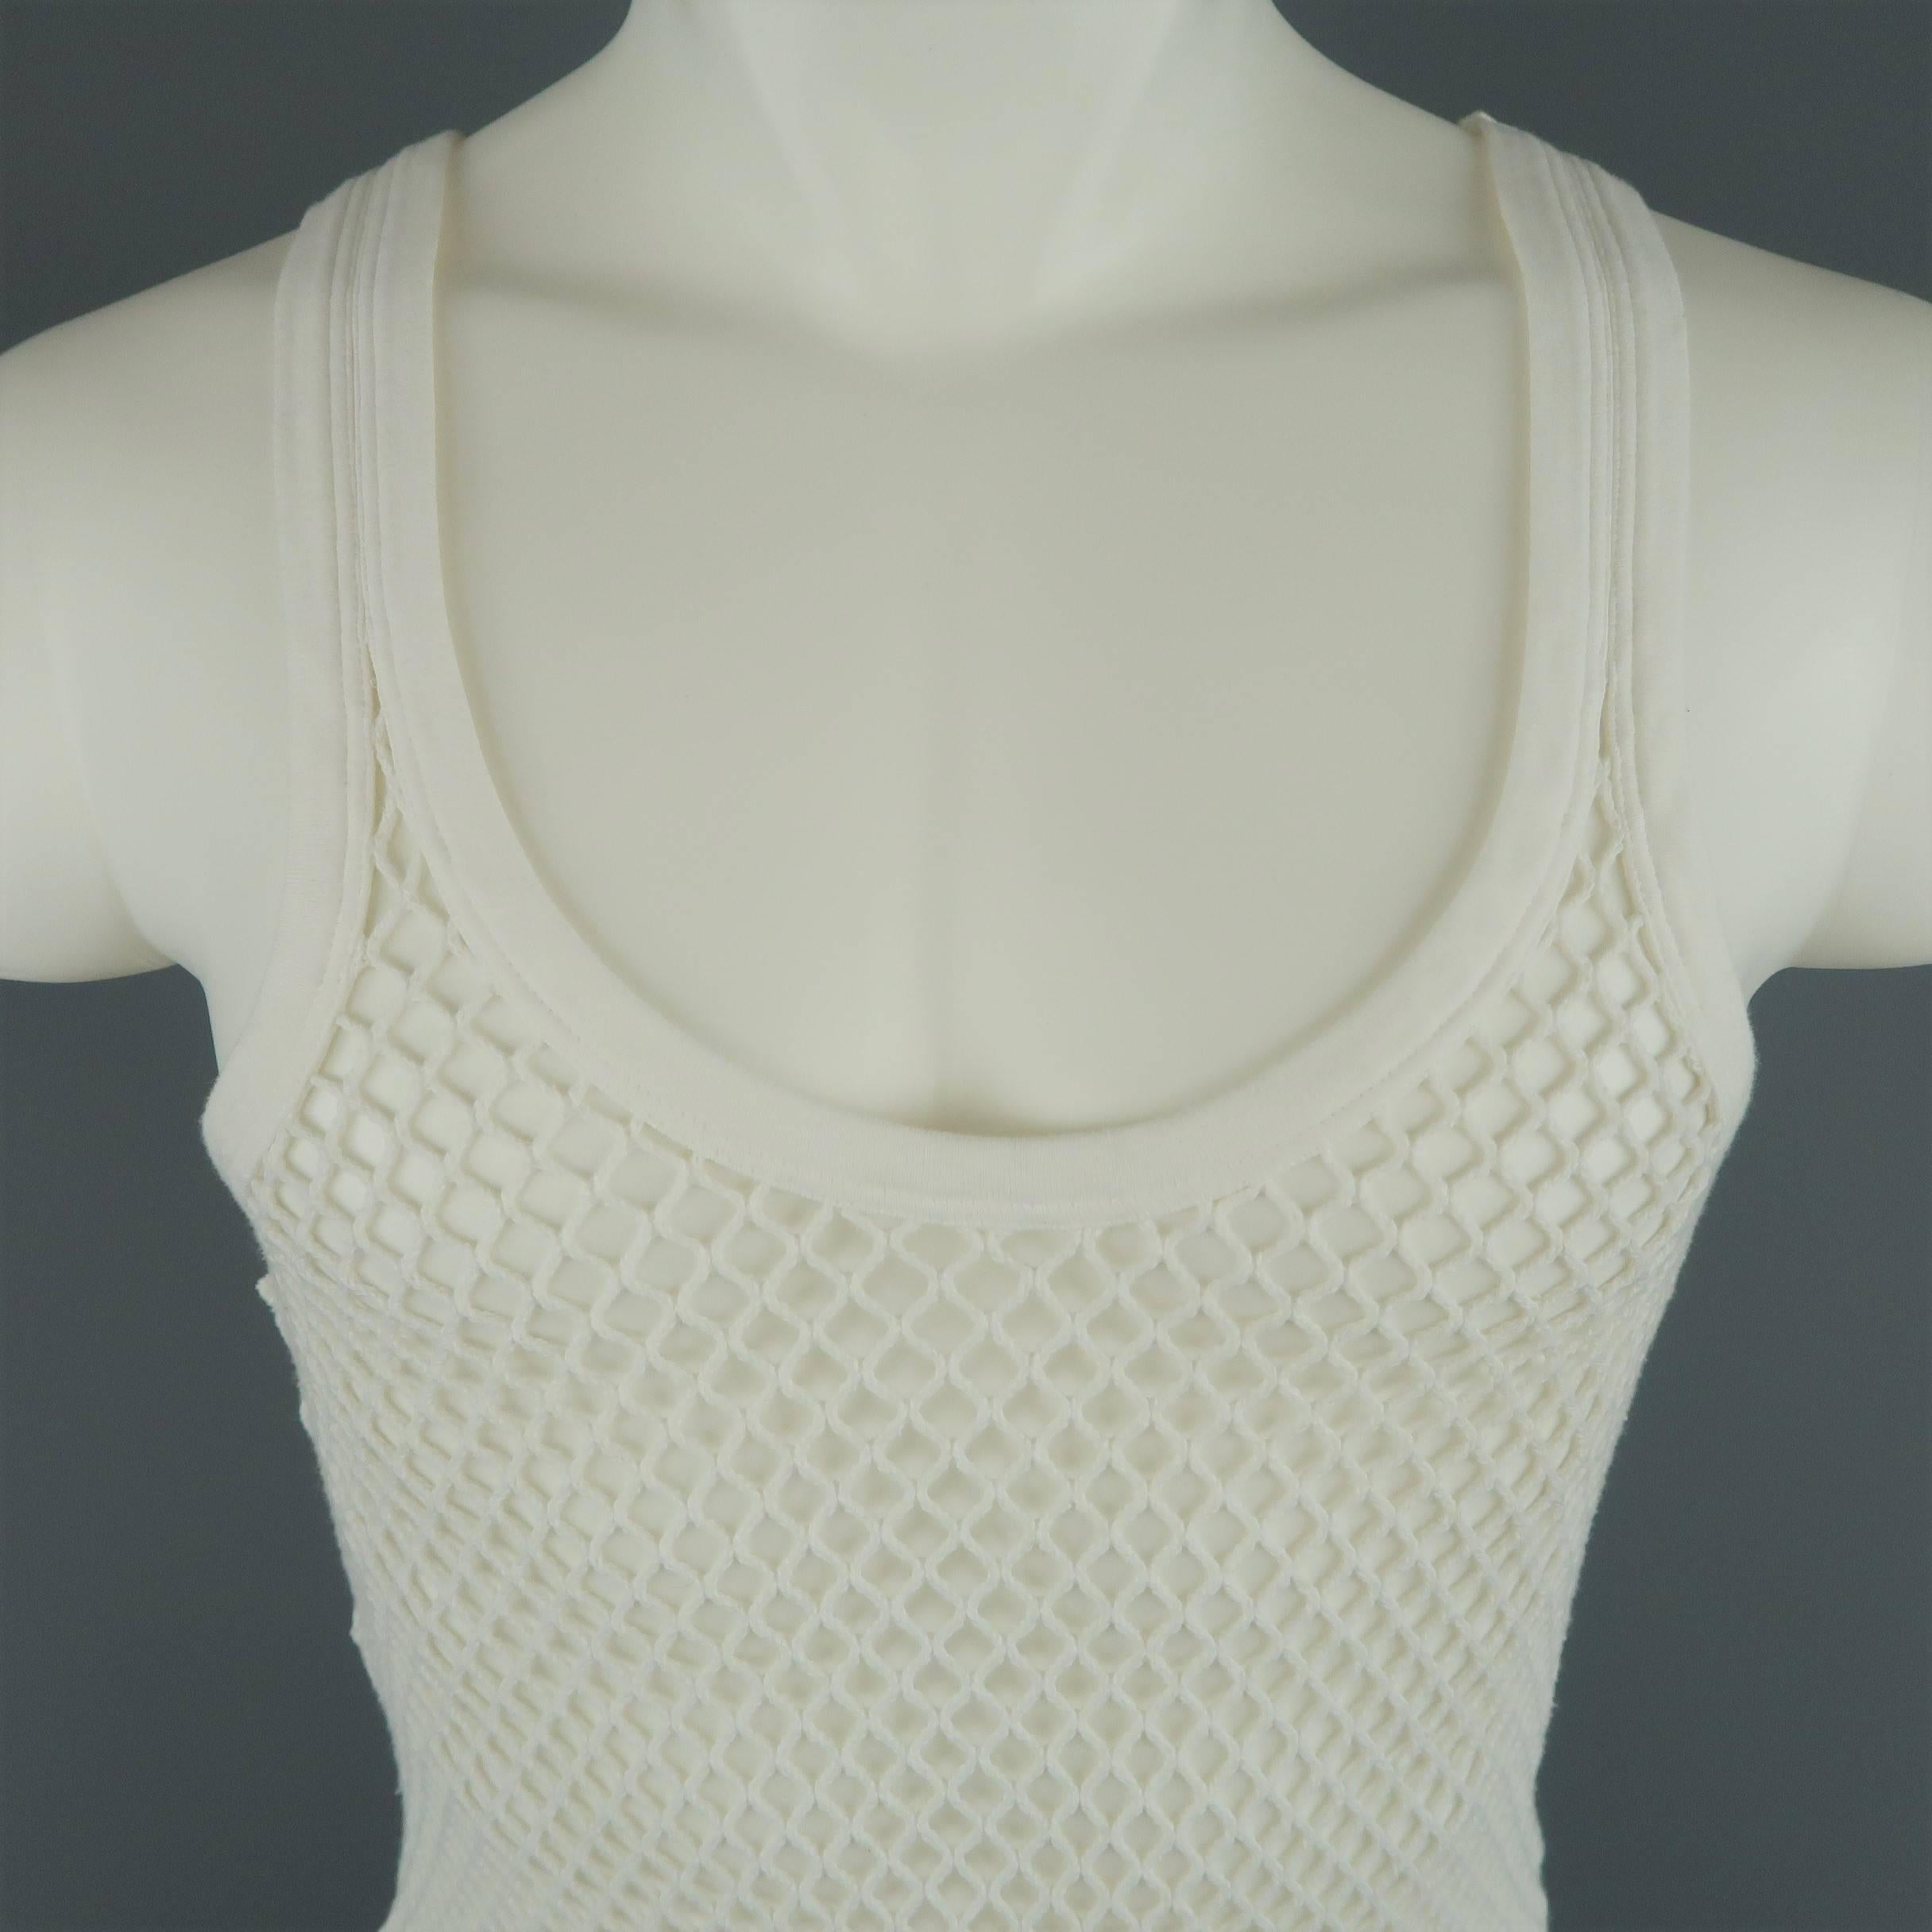 Burberry Prorsum fitted tank top comes in white cotton fishnet mesh knit with a scoop neck. Made in Italy.
 
Good Pre-Owned Condition.
Marked: L
 
Measurements:
    Shoulder: 13 in.
    Chest: 38 in.
    Length: 29 in.

